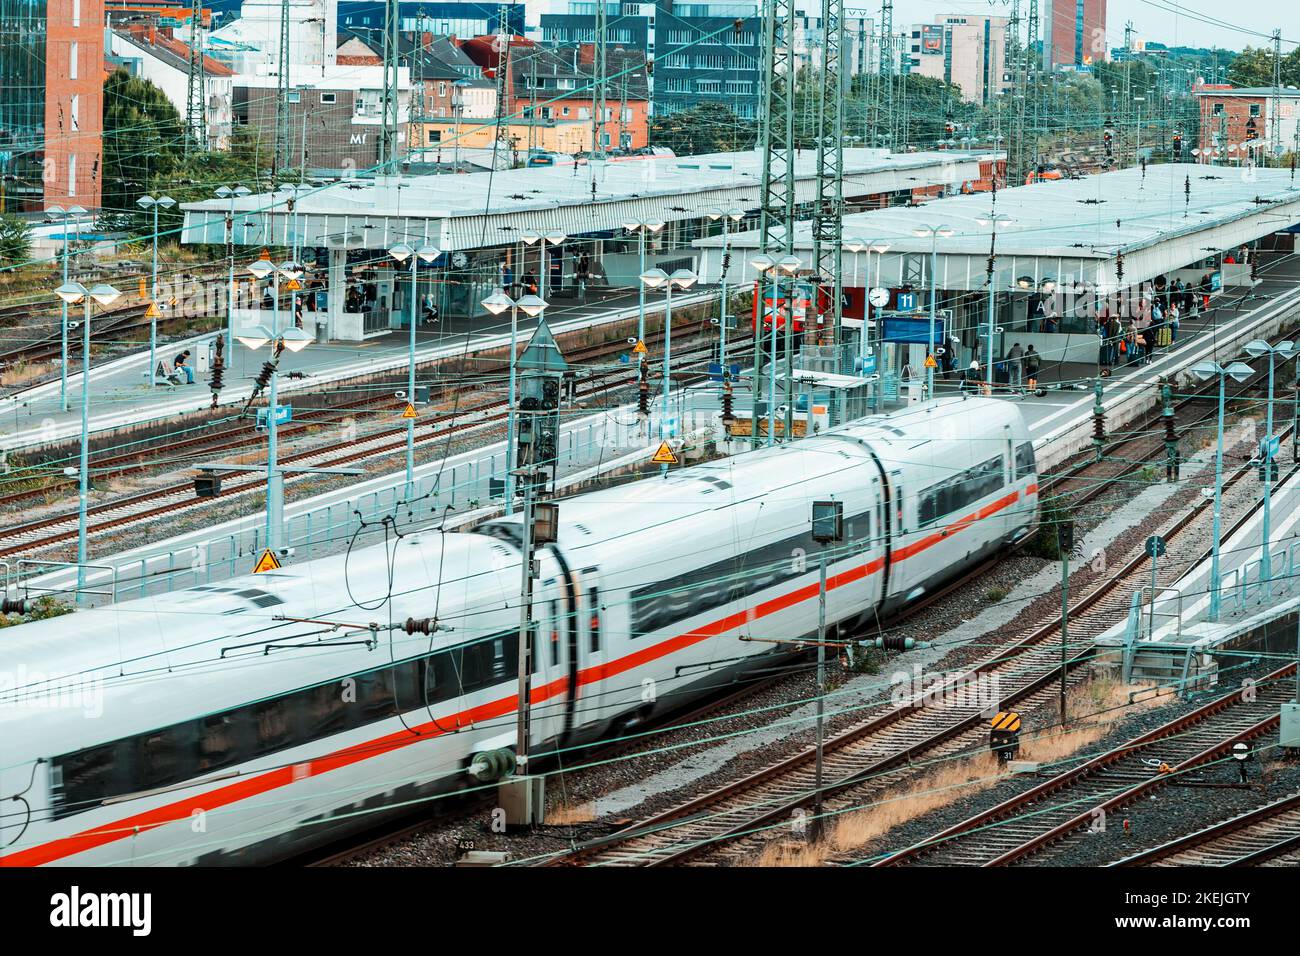 26 July 2022, Munster, Germany: modern high speed intercity DB Deutche Bahn train carries passengers. Branching of railway rails near stations and pla Stock Photo